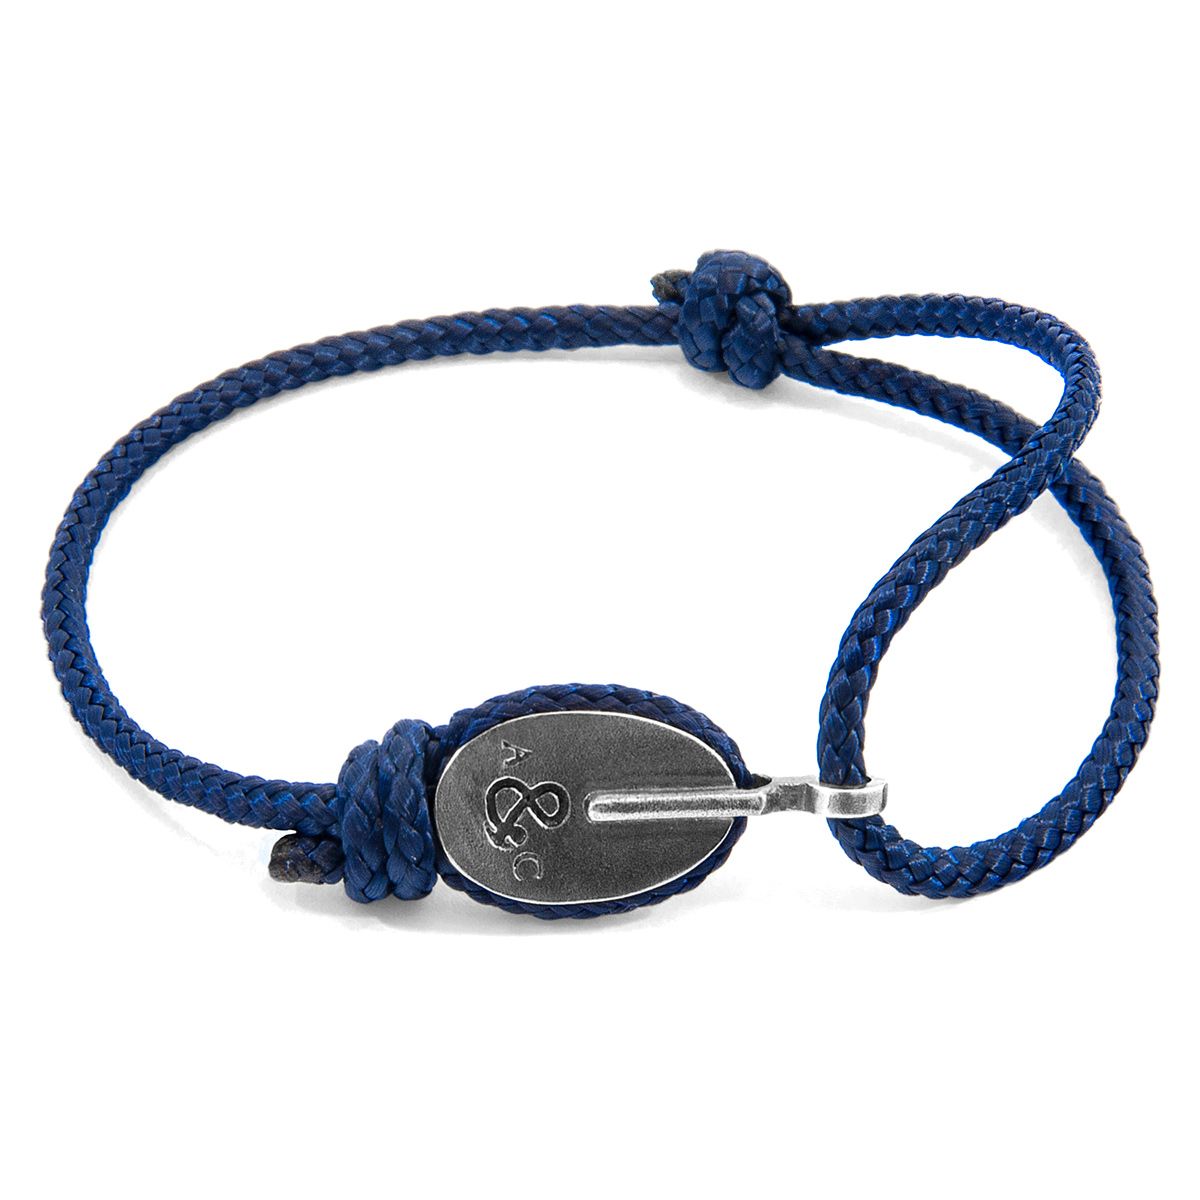 The Navy Blue London Silver and Rope Bracelet was both designed and skilfully handcrafted completely in Great Britain, In Quality We Trust. For the Modern Journeyman (and woman), ANCHOR & CREW takes ownership of an exploratory lifestyle and enjoys the Happy-Good Life. Combining British craft manufacturing with a discerning modern-minimalist style, this ANCHOR & CREW bracelet features:

3mm diameter performance Marine Grade polyester and nylon rope (GB) 
Secure solid .925 sterling silver pulley (GB) 

SIZING
This bracelet is one size fits all, with the rope able to extend or tighten to suit your wrist size. To take the bracelet on or off your wrist, simply slide the one adjustable knot around the rope to make the loop size smaller or larger. Less is More.